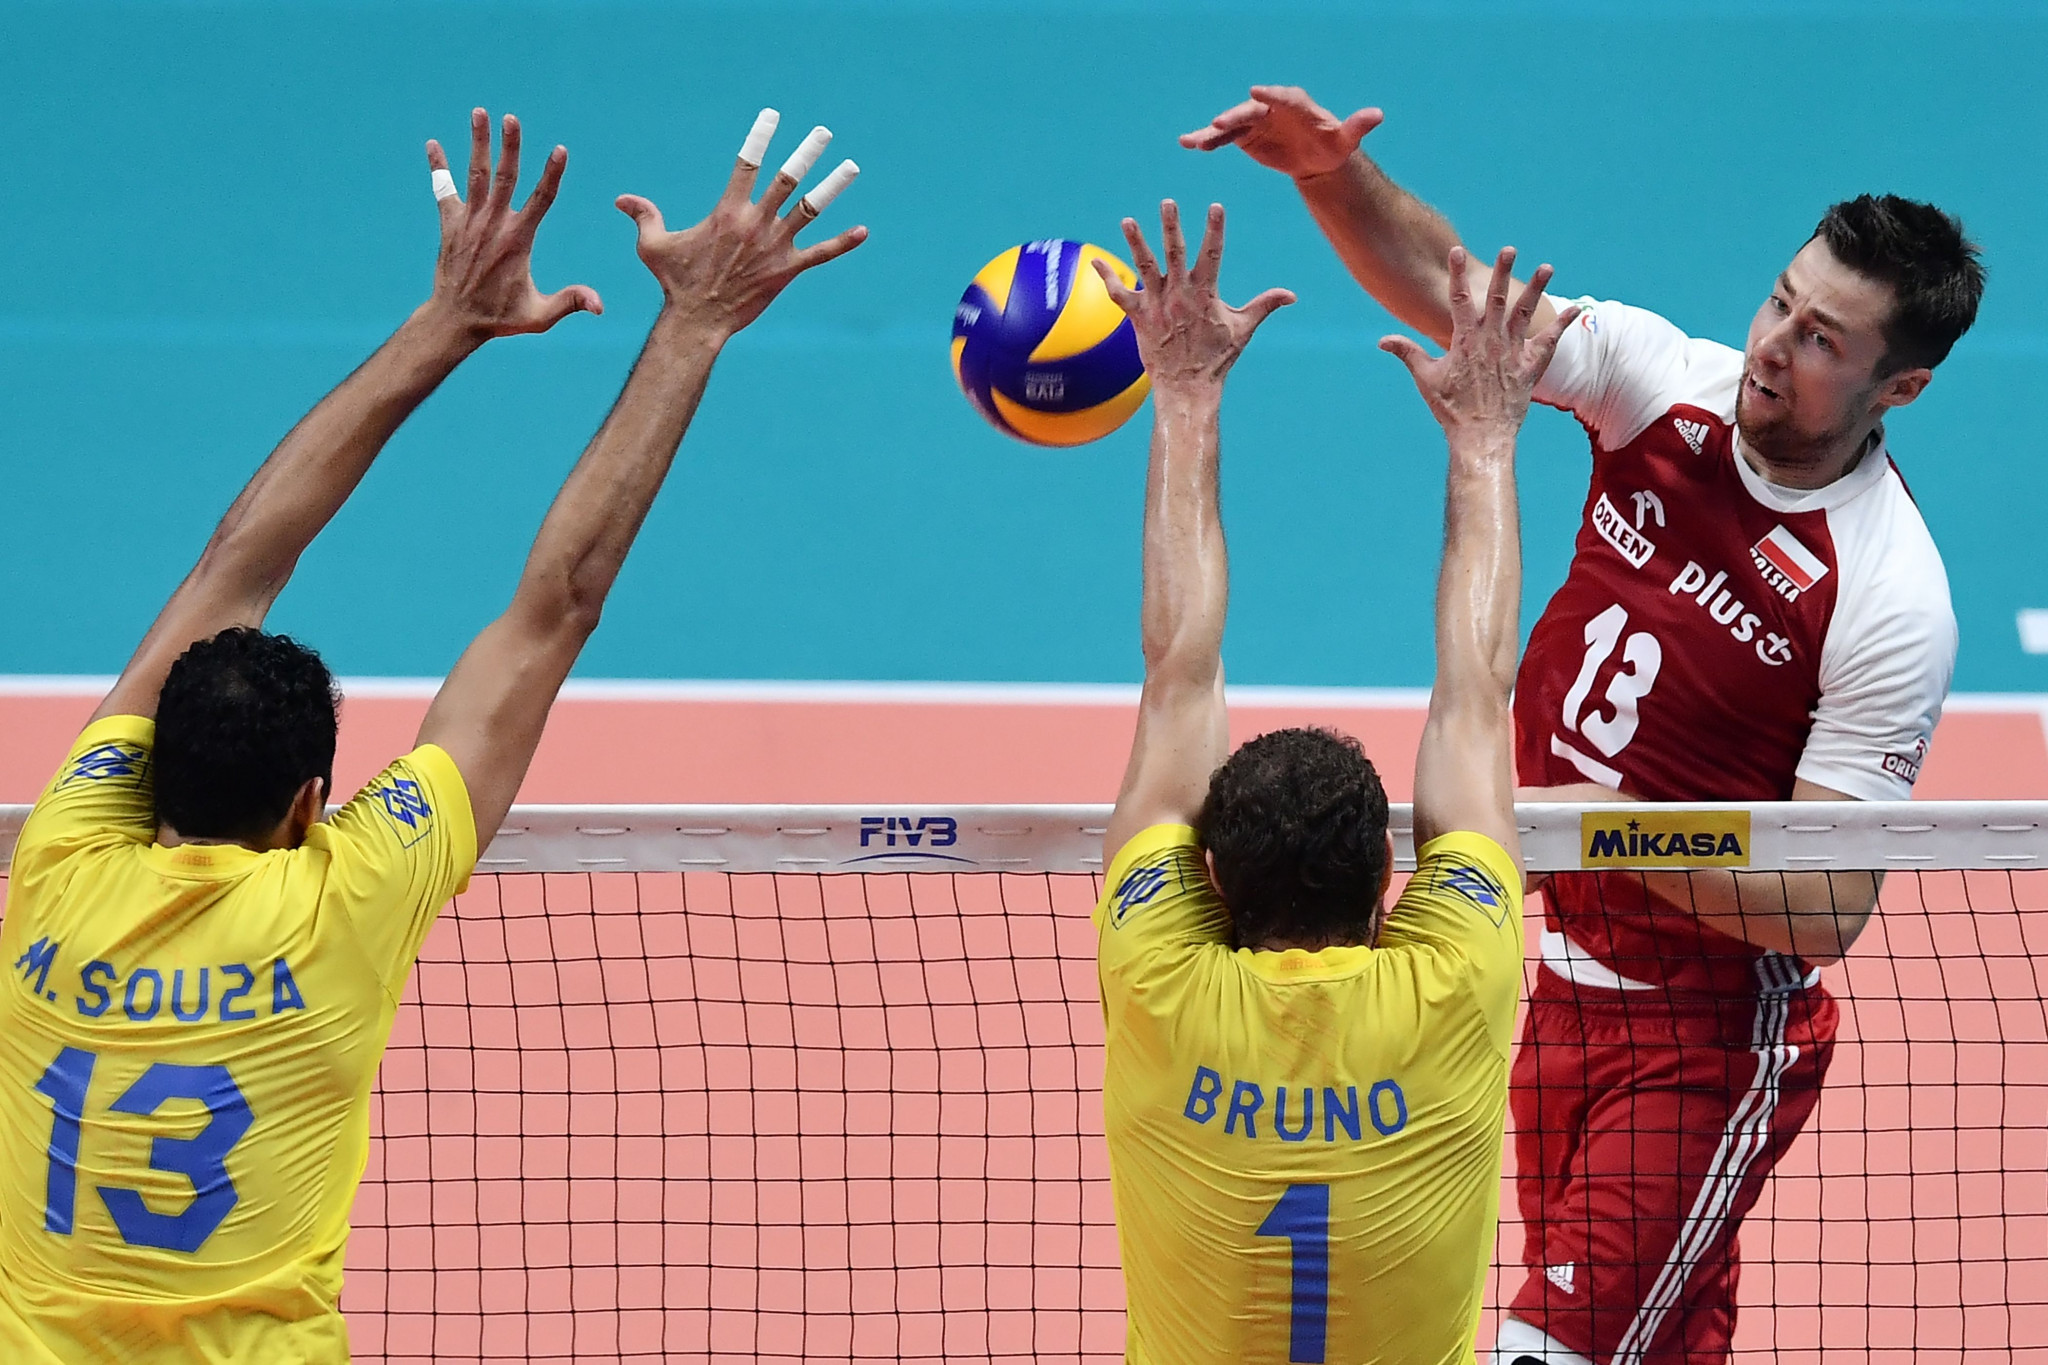 Co-hosts Poland seek third consecutive title at Men's Volleyball World Championship